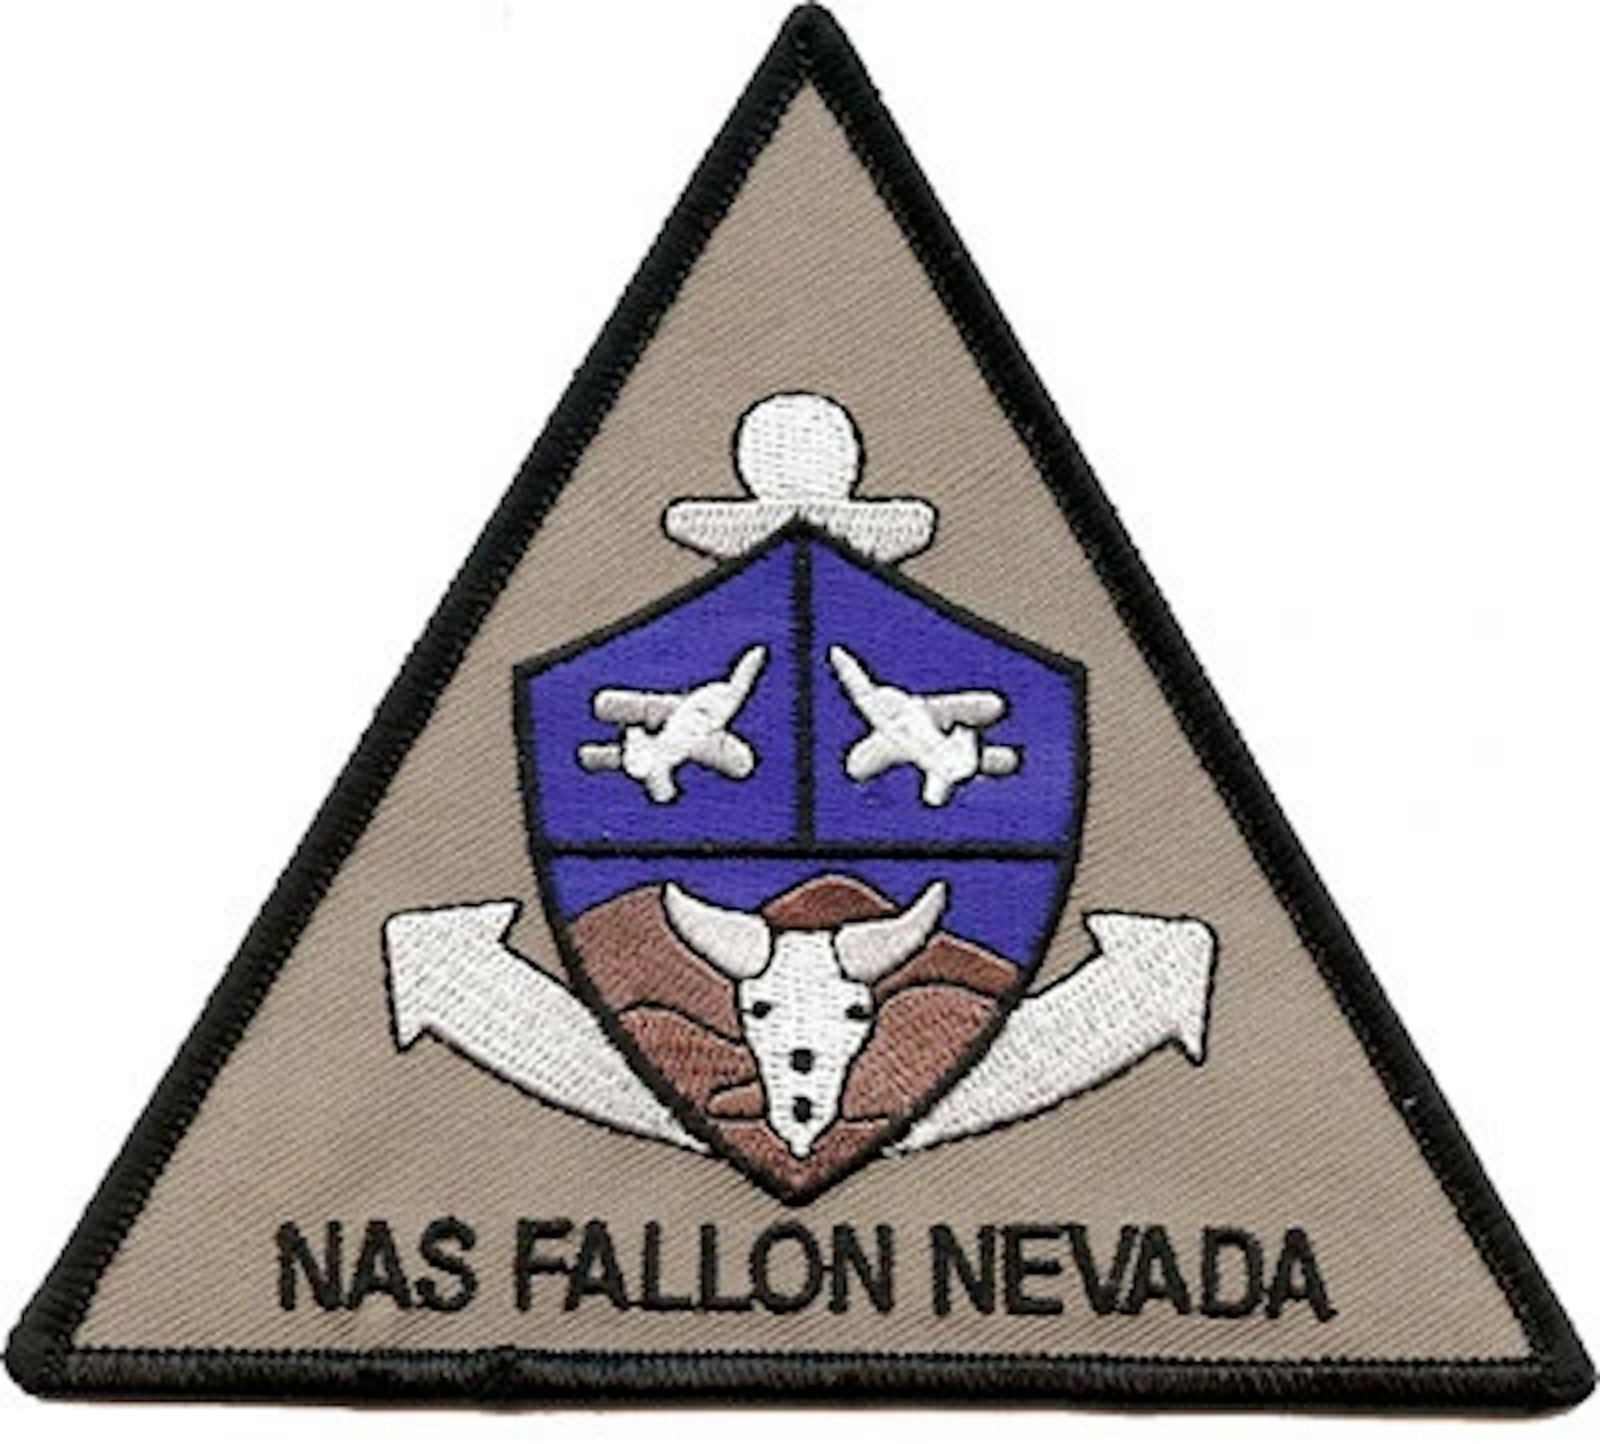  NAS FALLON NEVADA NAVAL AIR STATION TRIANGLE MILITARY EMBROIDERED PATCH